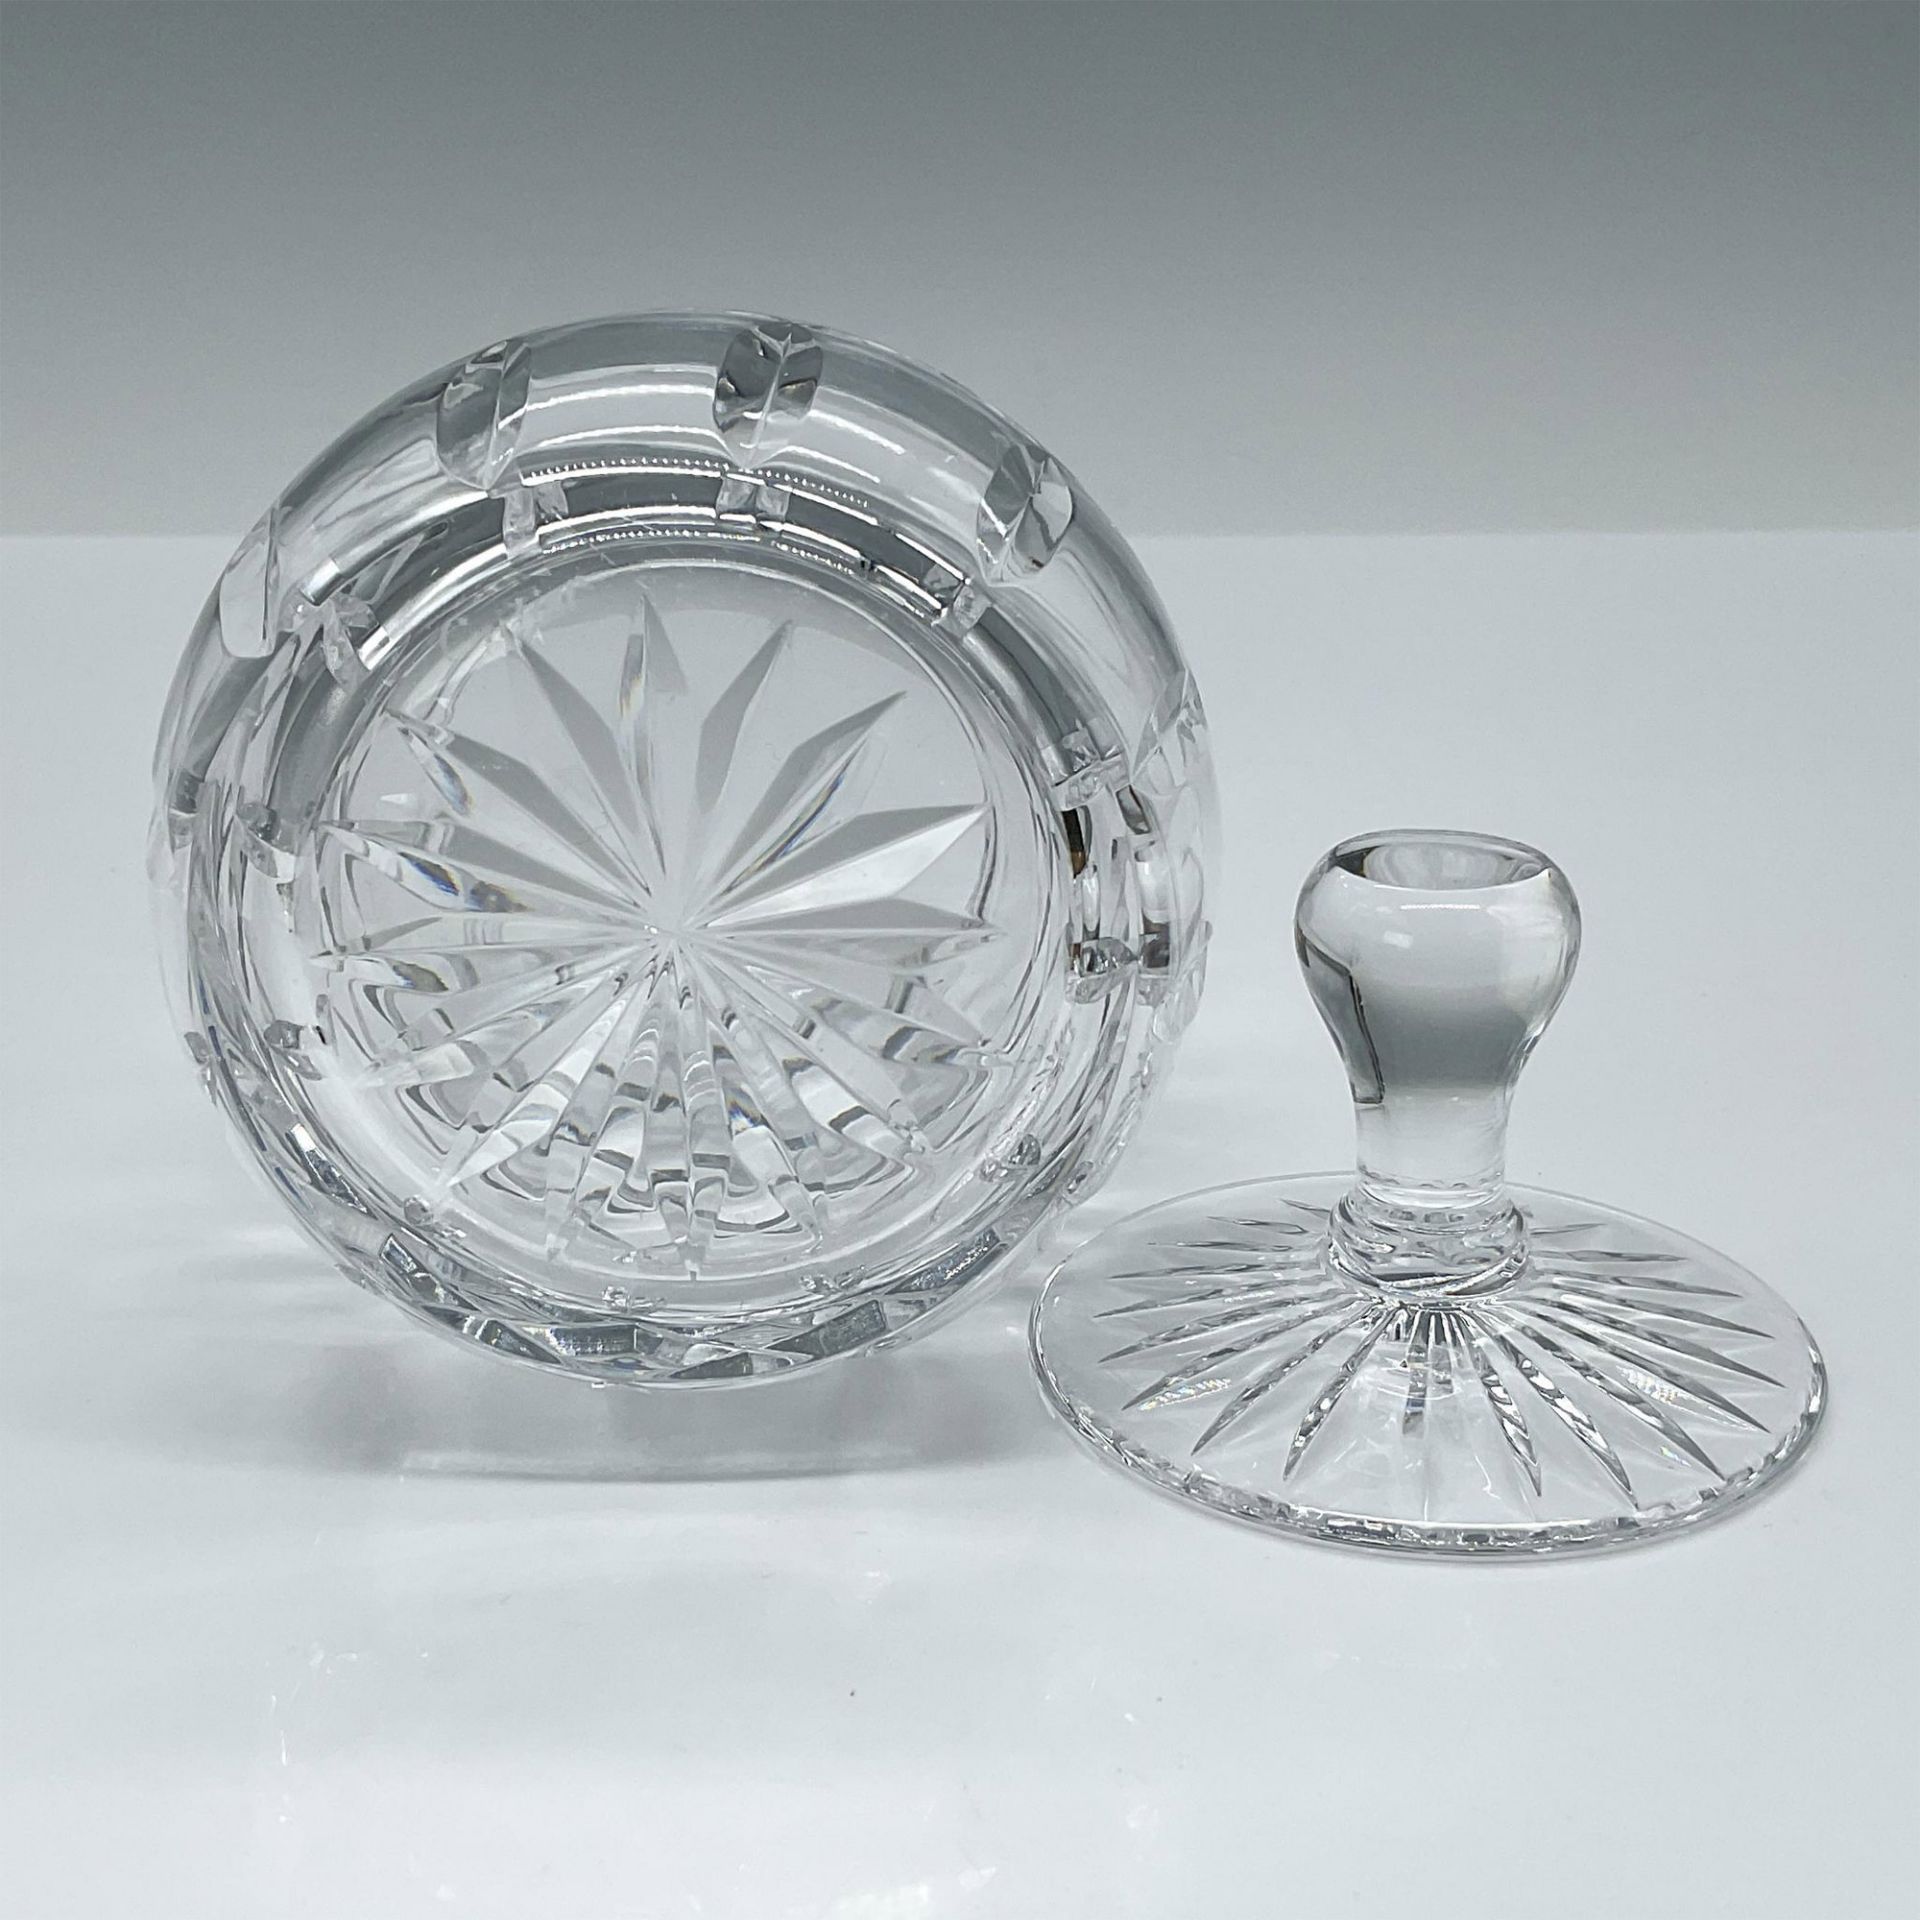 Cartier Crystal Biscuit Jar and Lid - Image 3 of 3